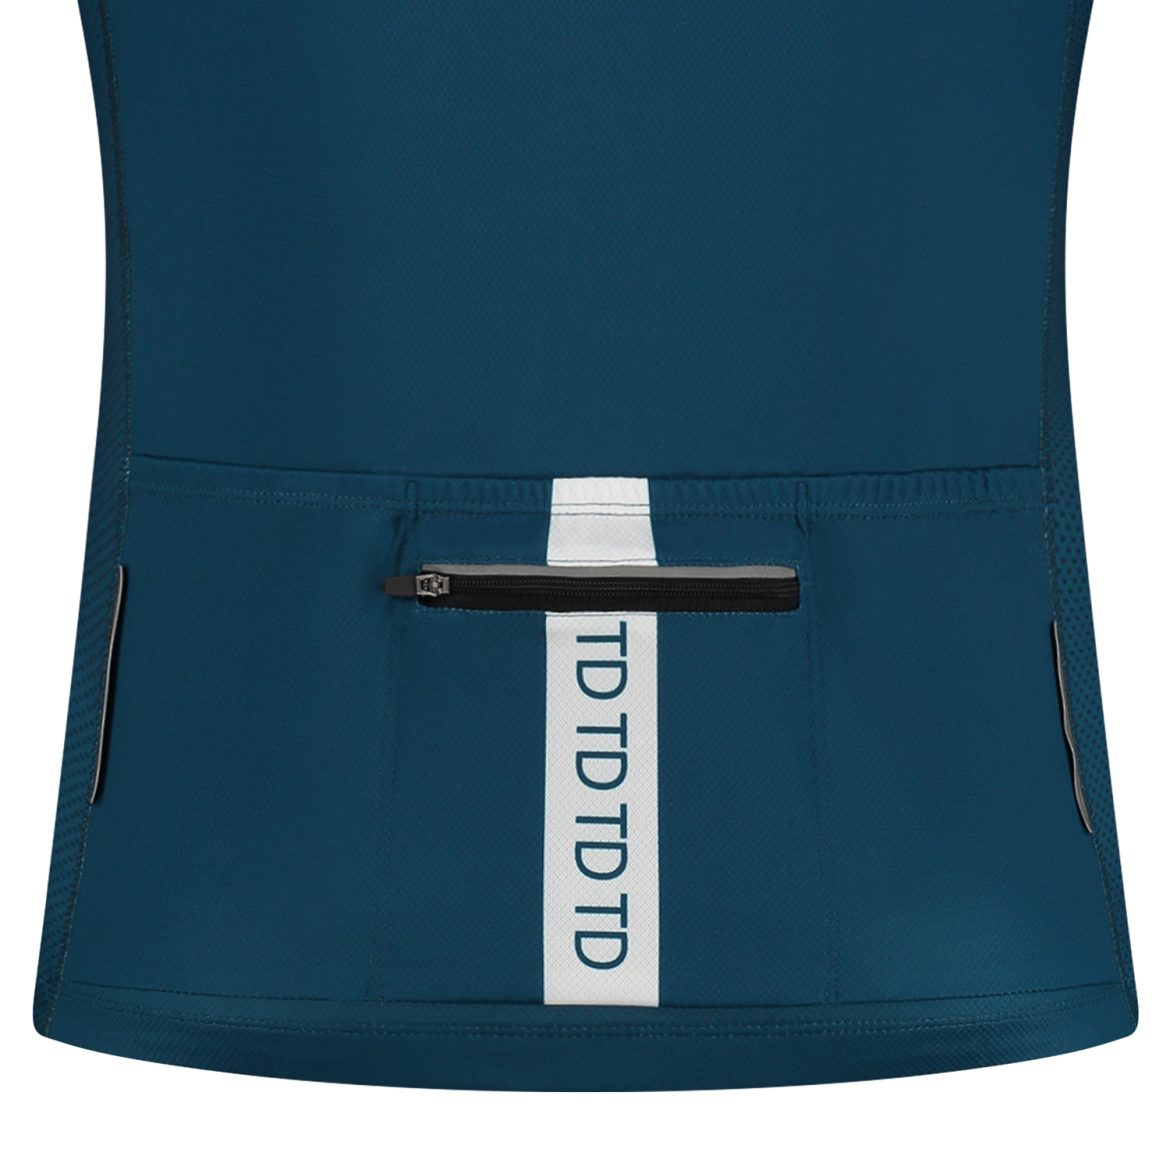 Back detail photo of the 3 back pockets with zipper of a dark blue cycling jerseys from TD